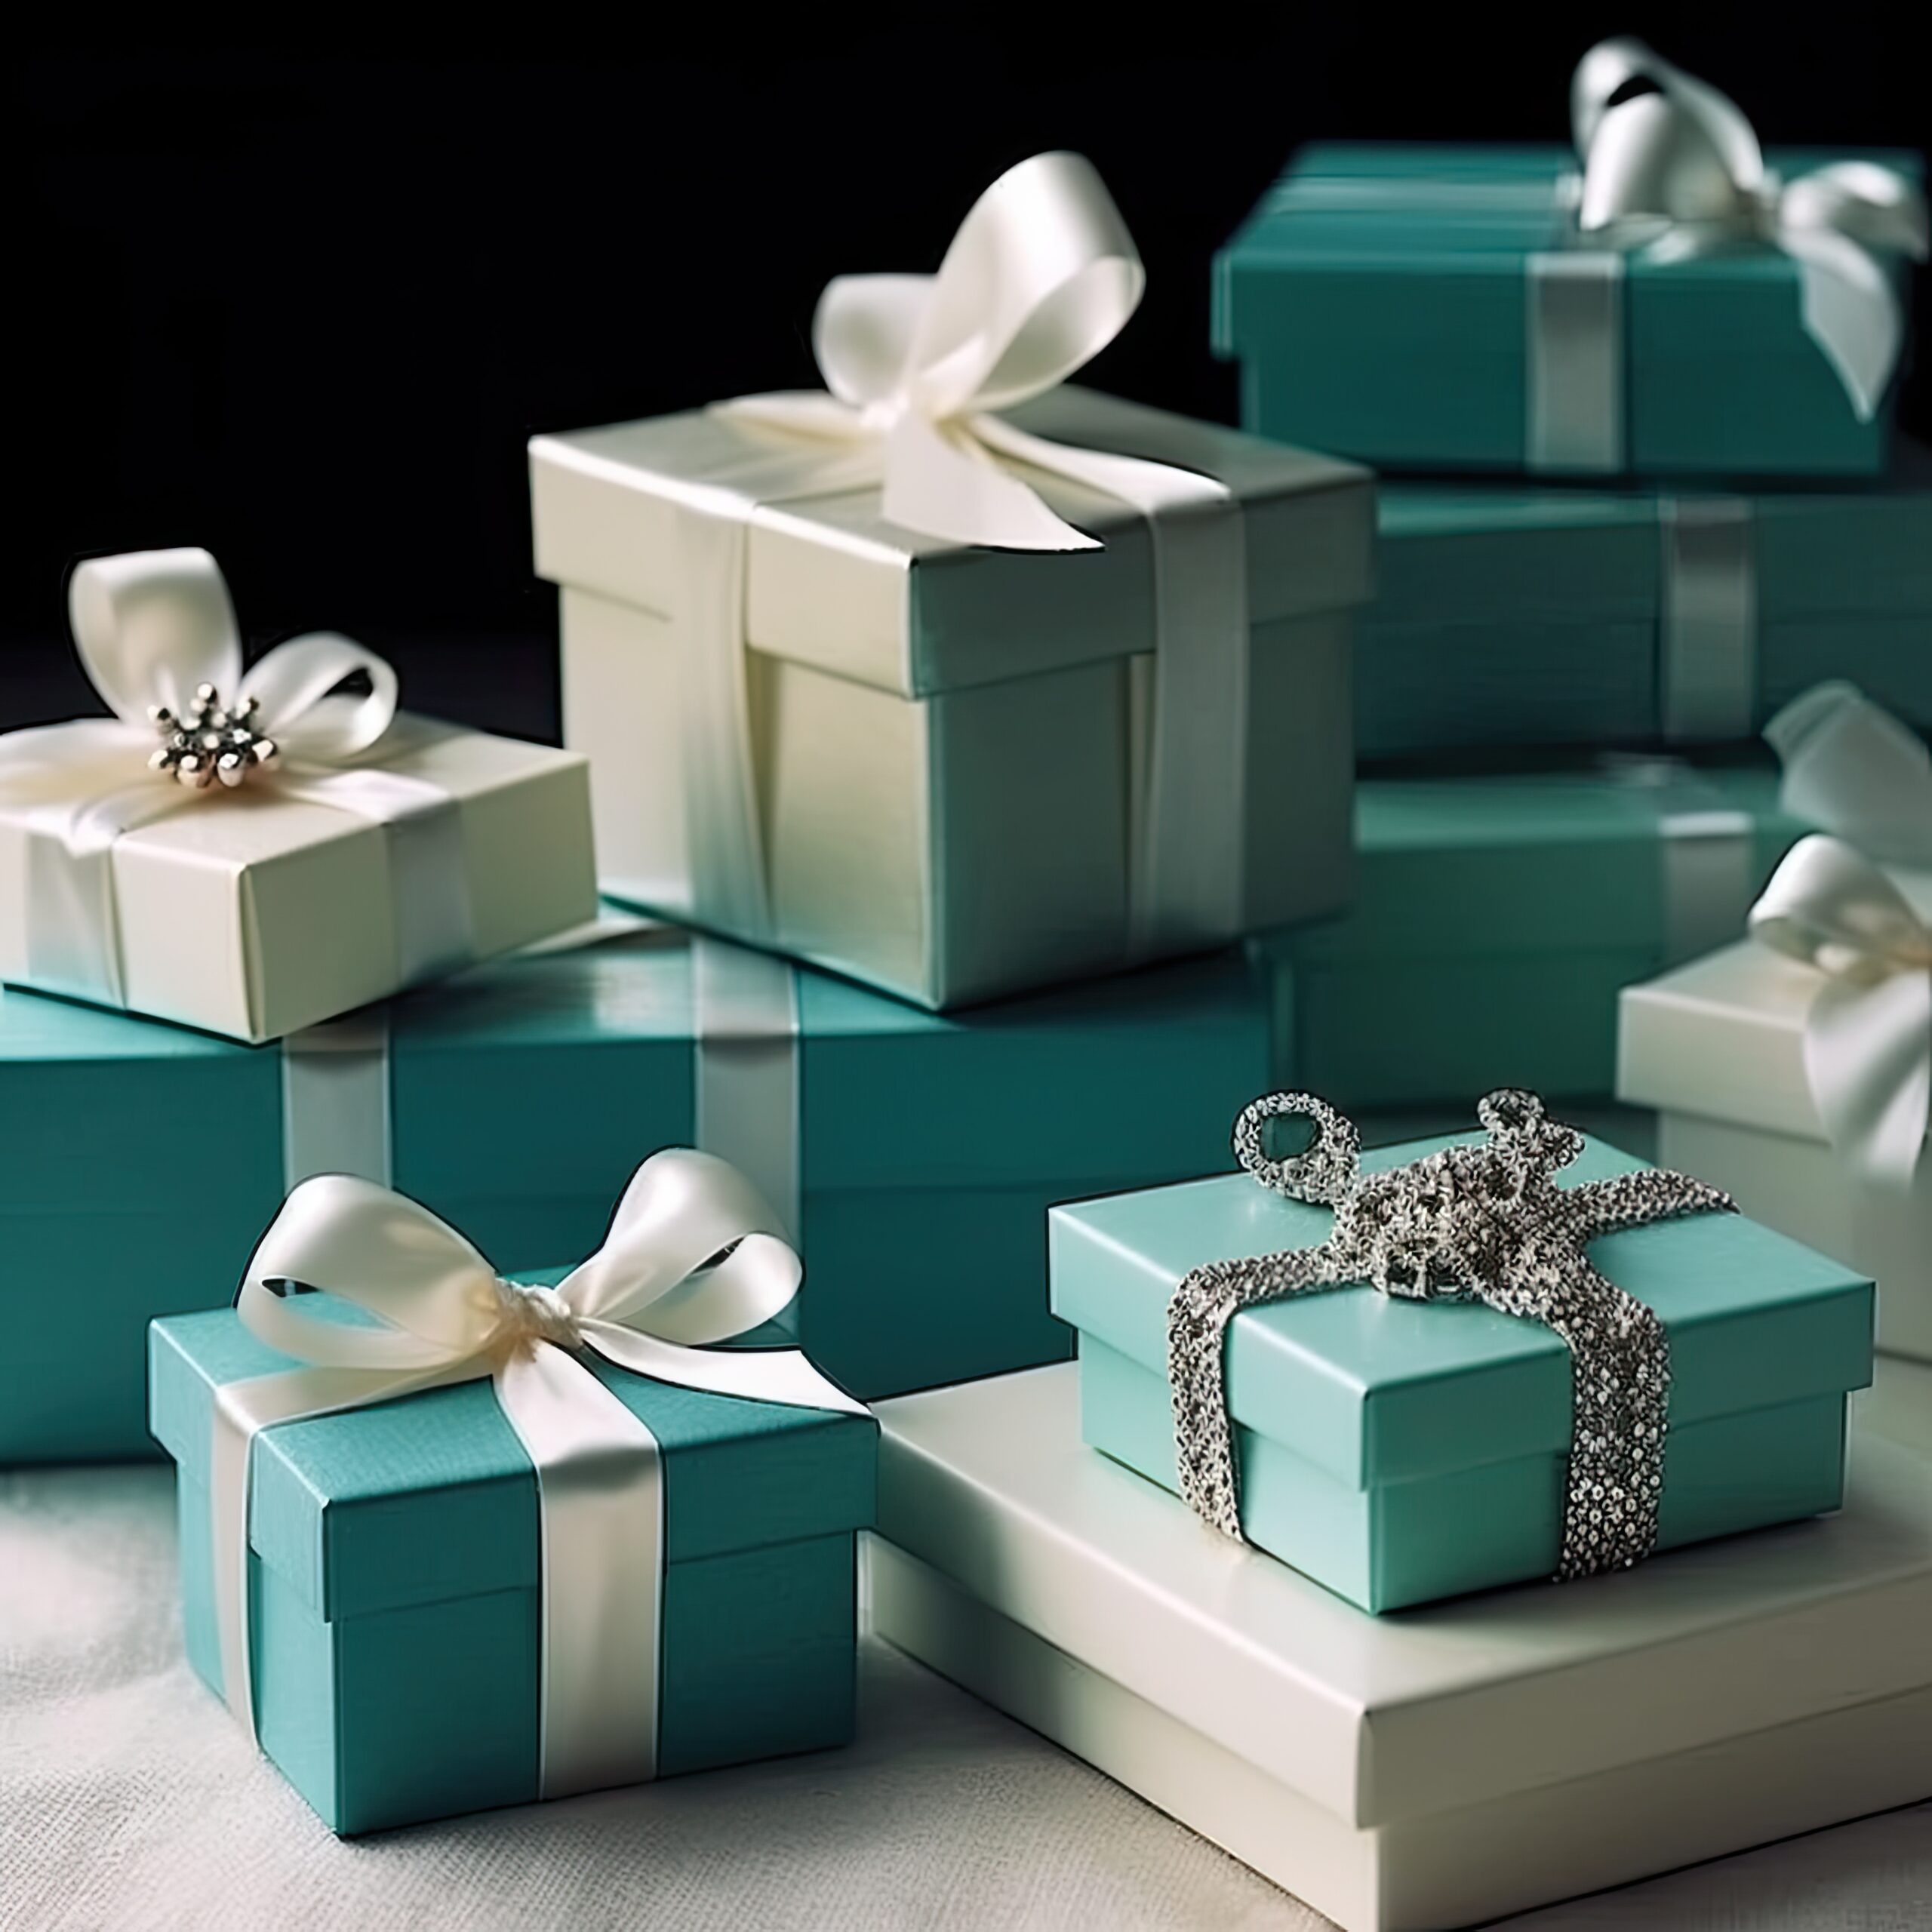 group-gift-boxes-with-silver-bow-them-scaled